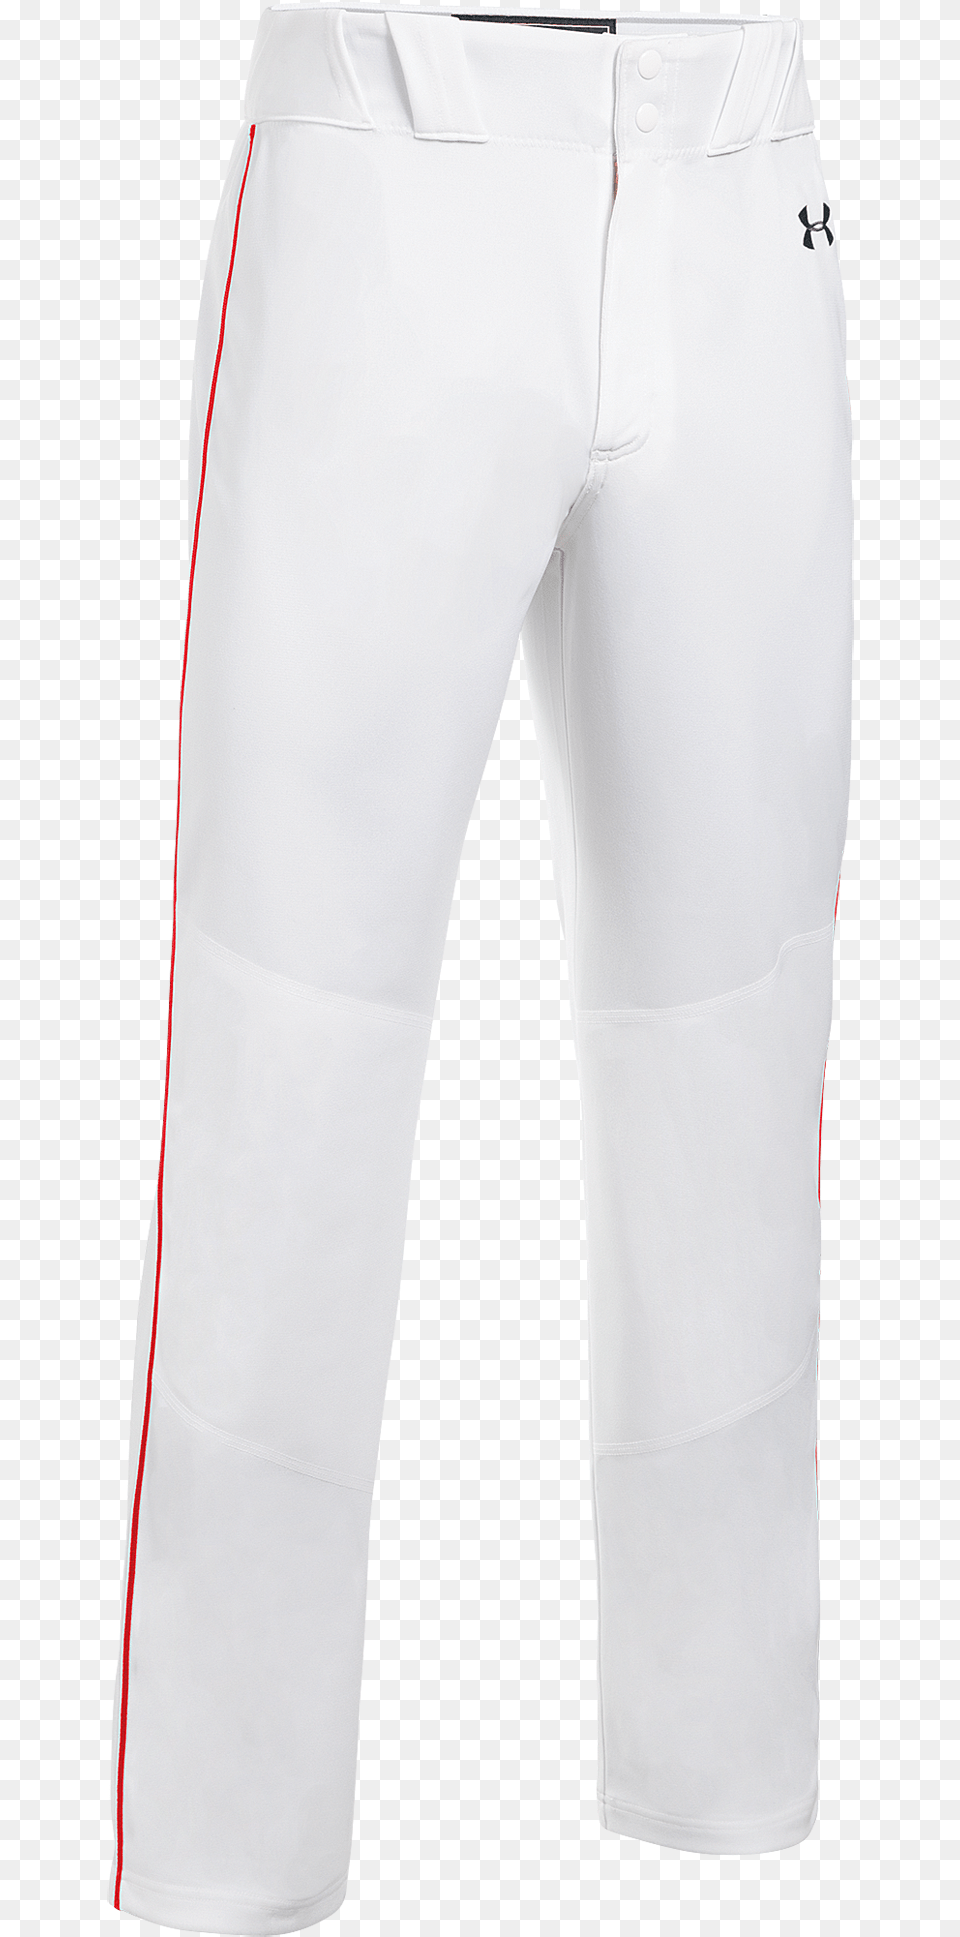 Under Armour Team Piped Icon Baseball Chino Cloth, Clothing, Pants, Shirt, Jeans Free Png Download